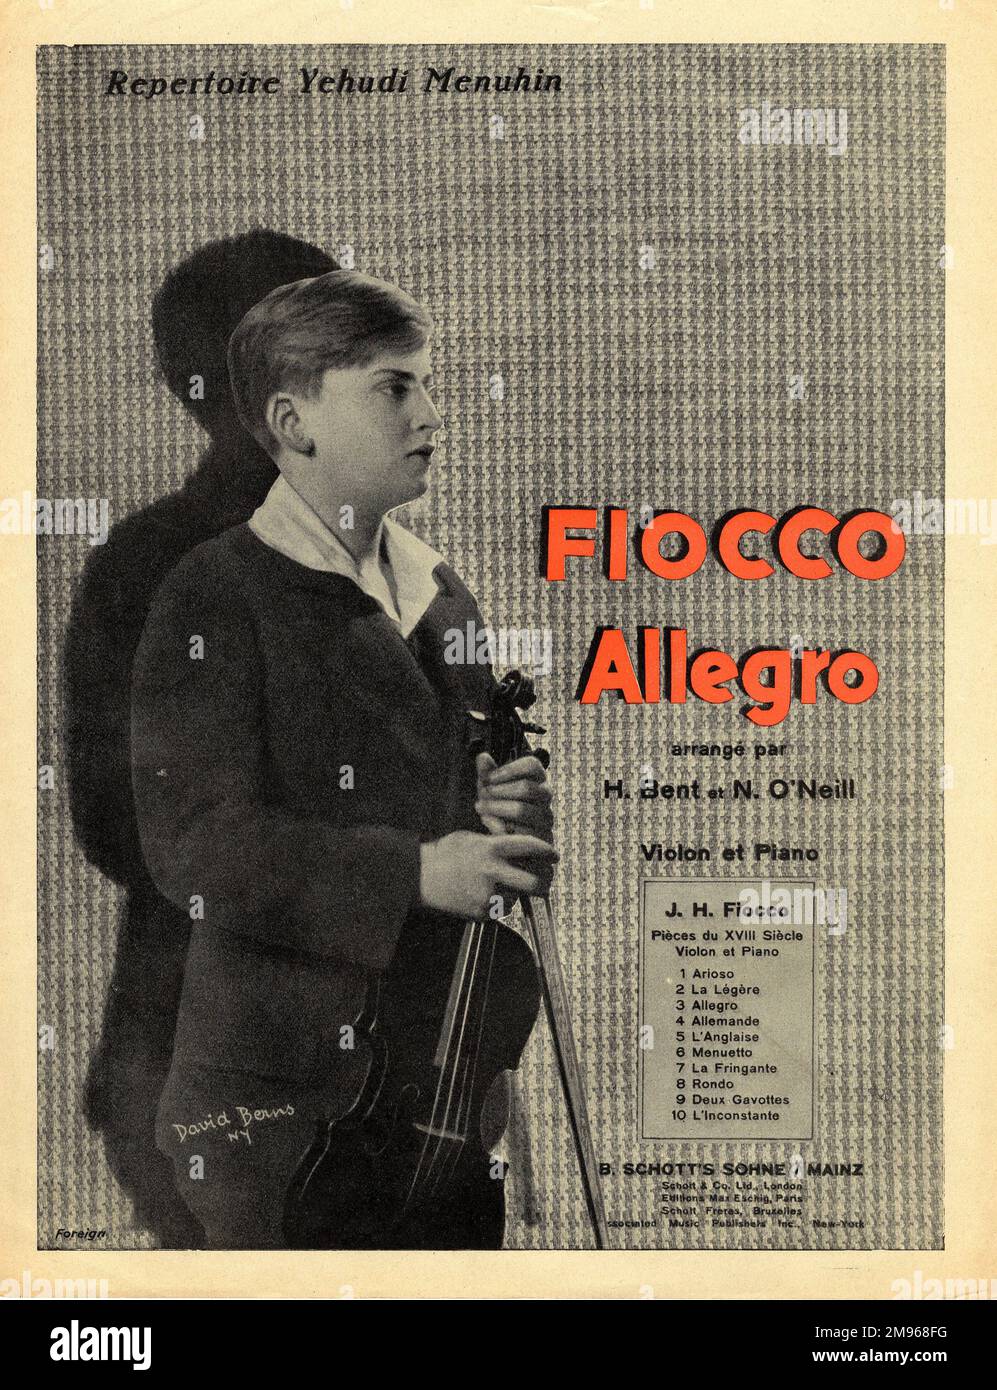 Cover design for a book of ten violin and piano pieces by the 18th century Belgian (Flemish) composer and violinist Joseph-Hector Fiocco (1703-1741), arranged by Arthur Bent and Norman O'Neill, as performed by the young Yehudi Menuhin, whose picture is on the cover, holding his violin and bow.  The pieces are published by Schott & Co (Schott Sohne), and are as follows: Arioso, La Legere, Allegro, Allemande, L'Anglaise, Menuetto, La Fringante, Rondo, Deux Gavottes, and L'Inconstante. Stock Photo